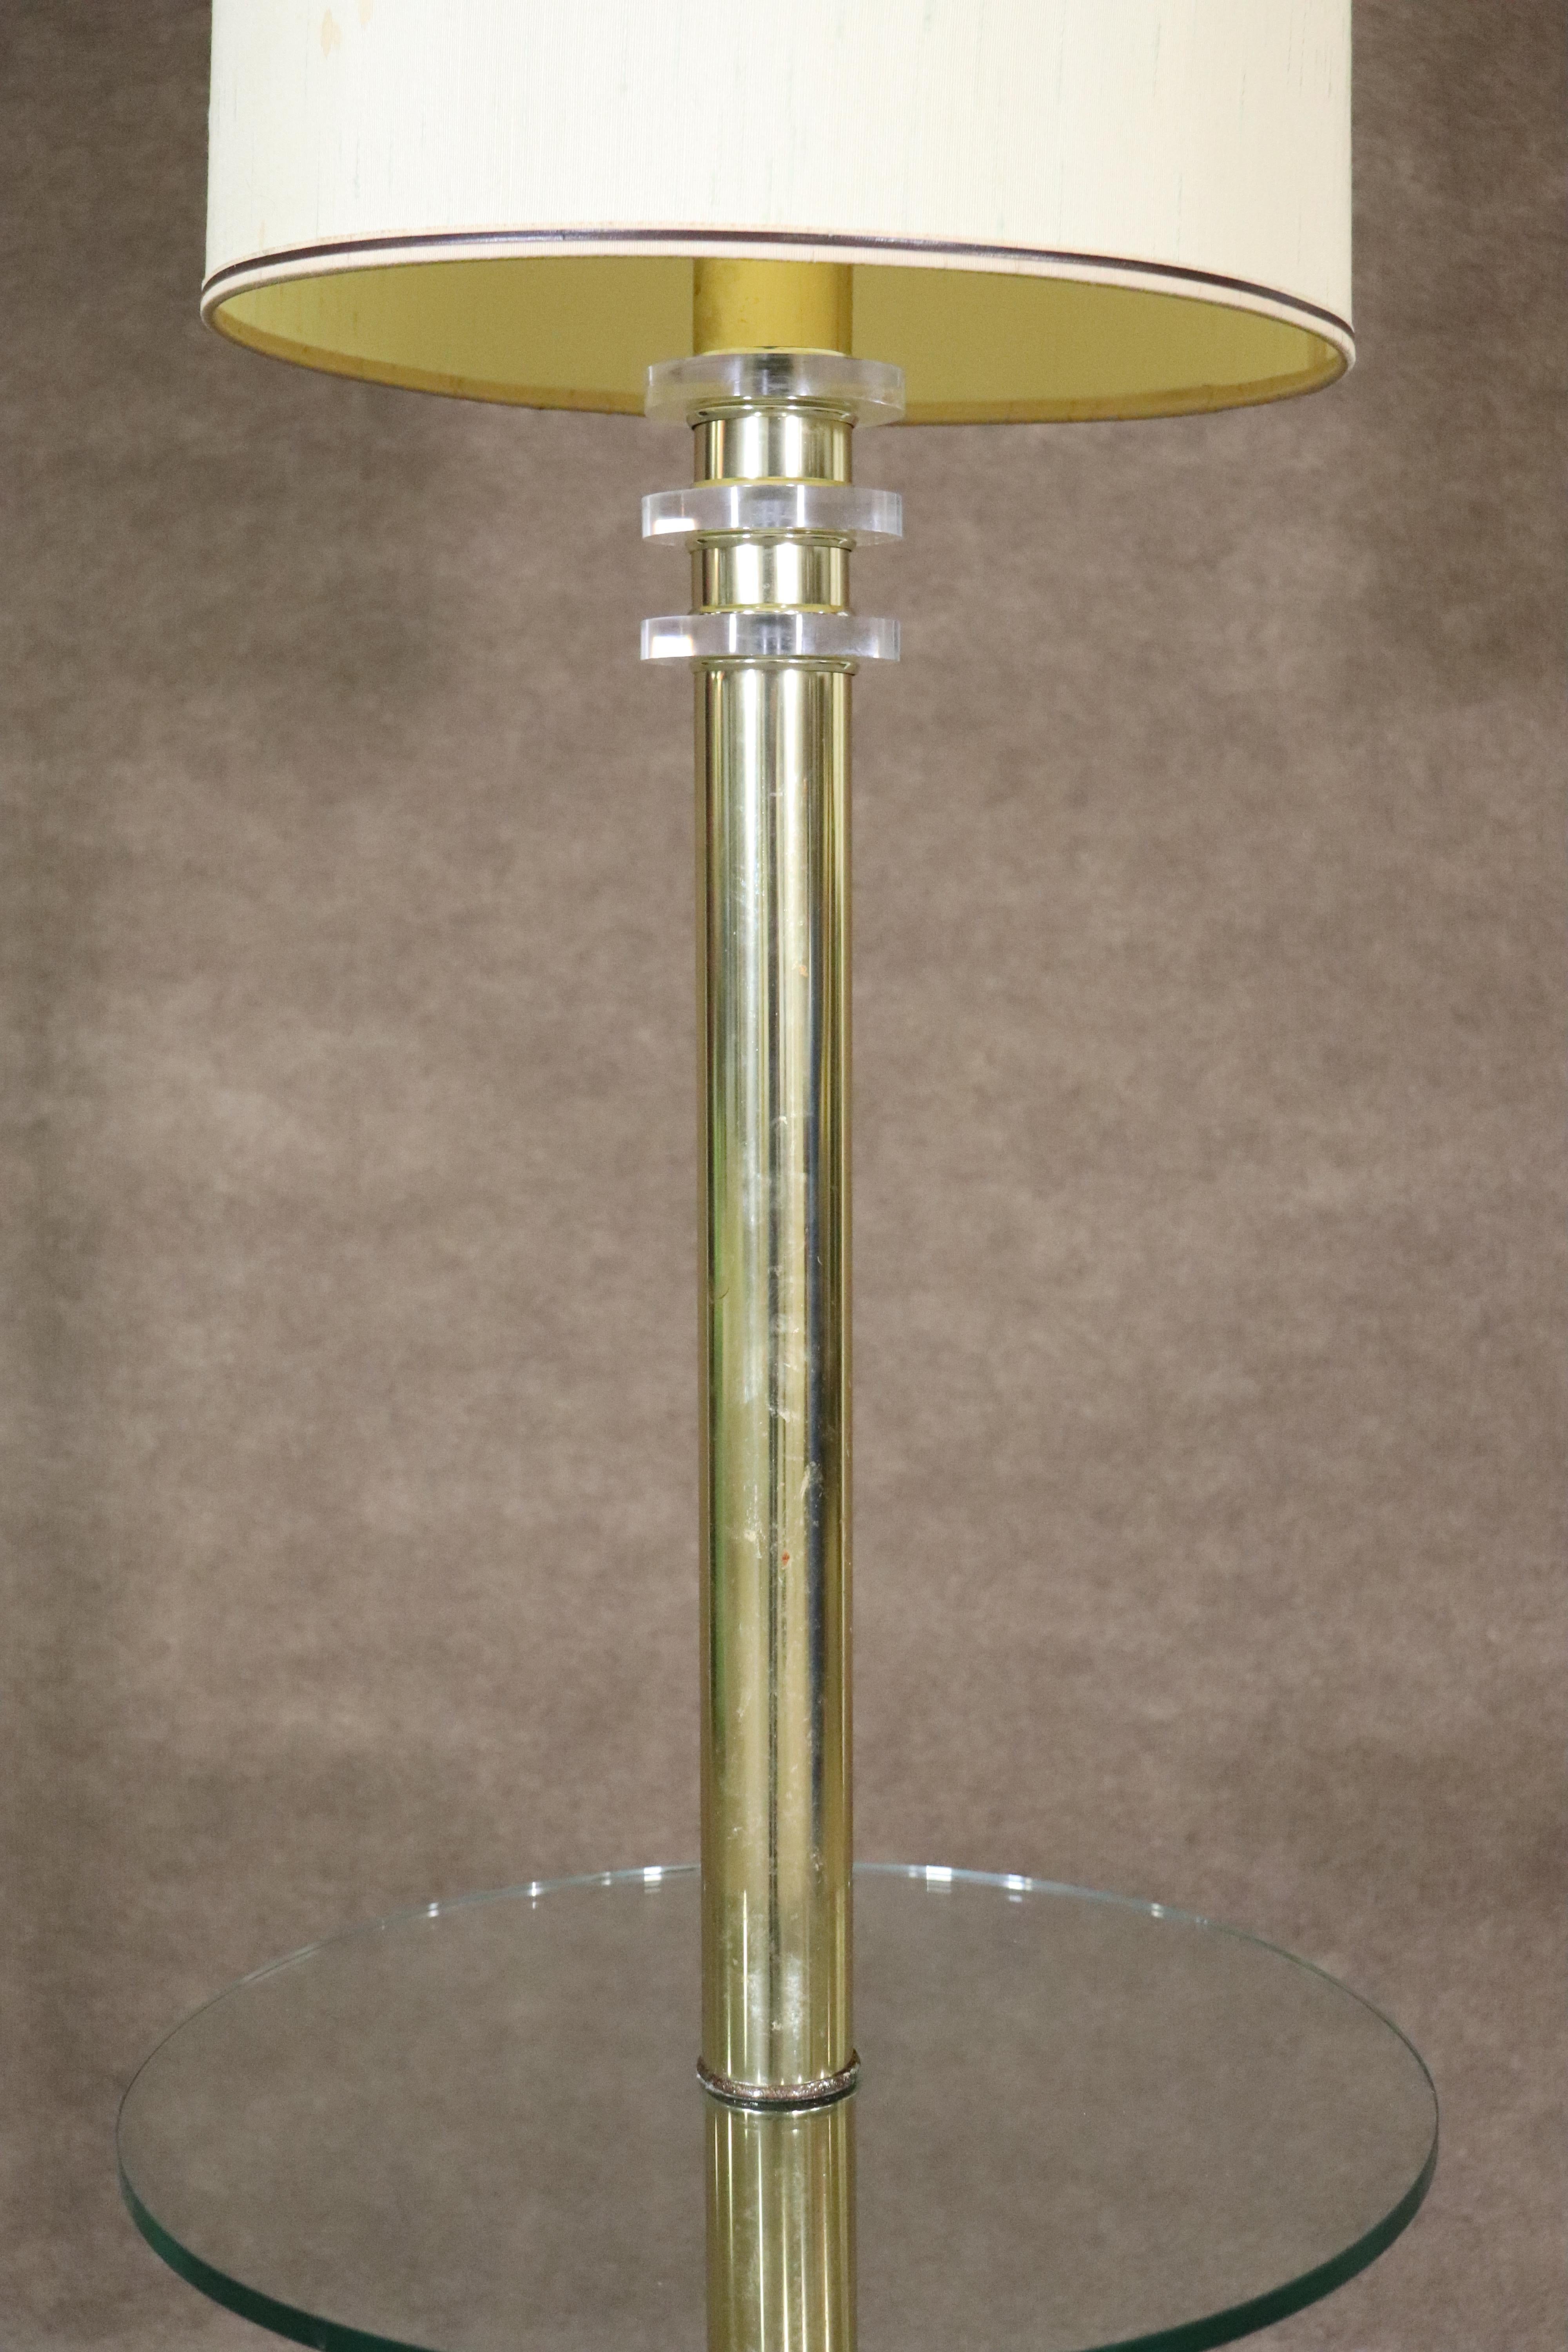 Tall floor lamp in polished brass with round glass table shelf. Accenting lucite discs sit under the round shade.
Please confirm location NY or NJ